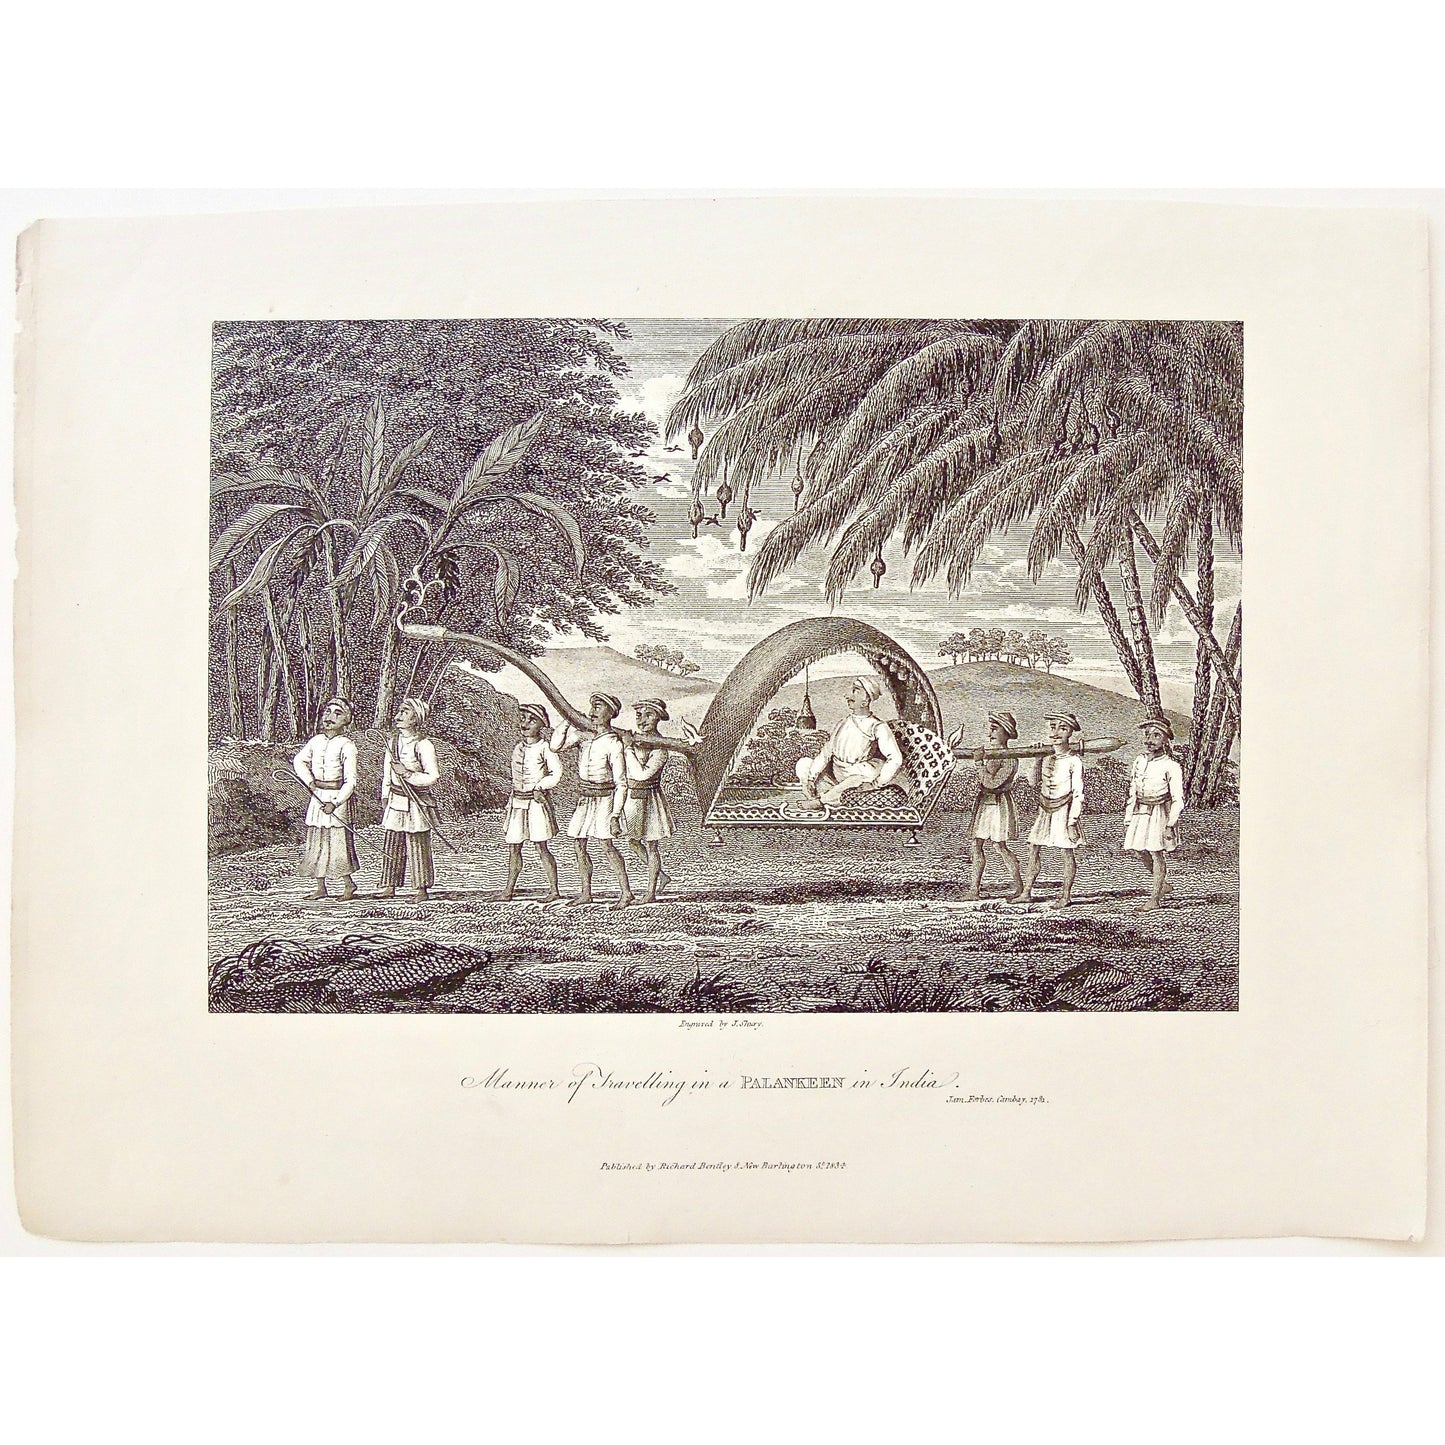 Manner of traveling in a Palankeen, Traveling in a Palankeen, Palankeen, India, Indian, Indian Palankeen, Carried in a Palankeen, Indian landscape, Indian scenery, Indian setting, James Forbes, Forbes, Eliza Rosée, Countess De Montalembert, Oriental Memoirs, Narrative of Seventeen Years Residence in India, Bentley, 8 New Burlington Street, London, Shury, Nichols & Son, 25 Parliament Street, 1781, 1834, Steel engraving, luxury, Antique Print, Antique, Prints, Vintage Prints, Vintage, Collector, Collectable,